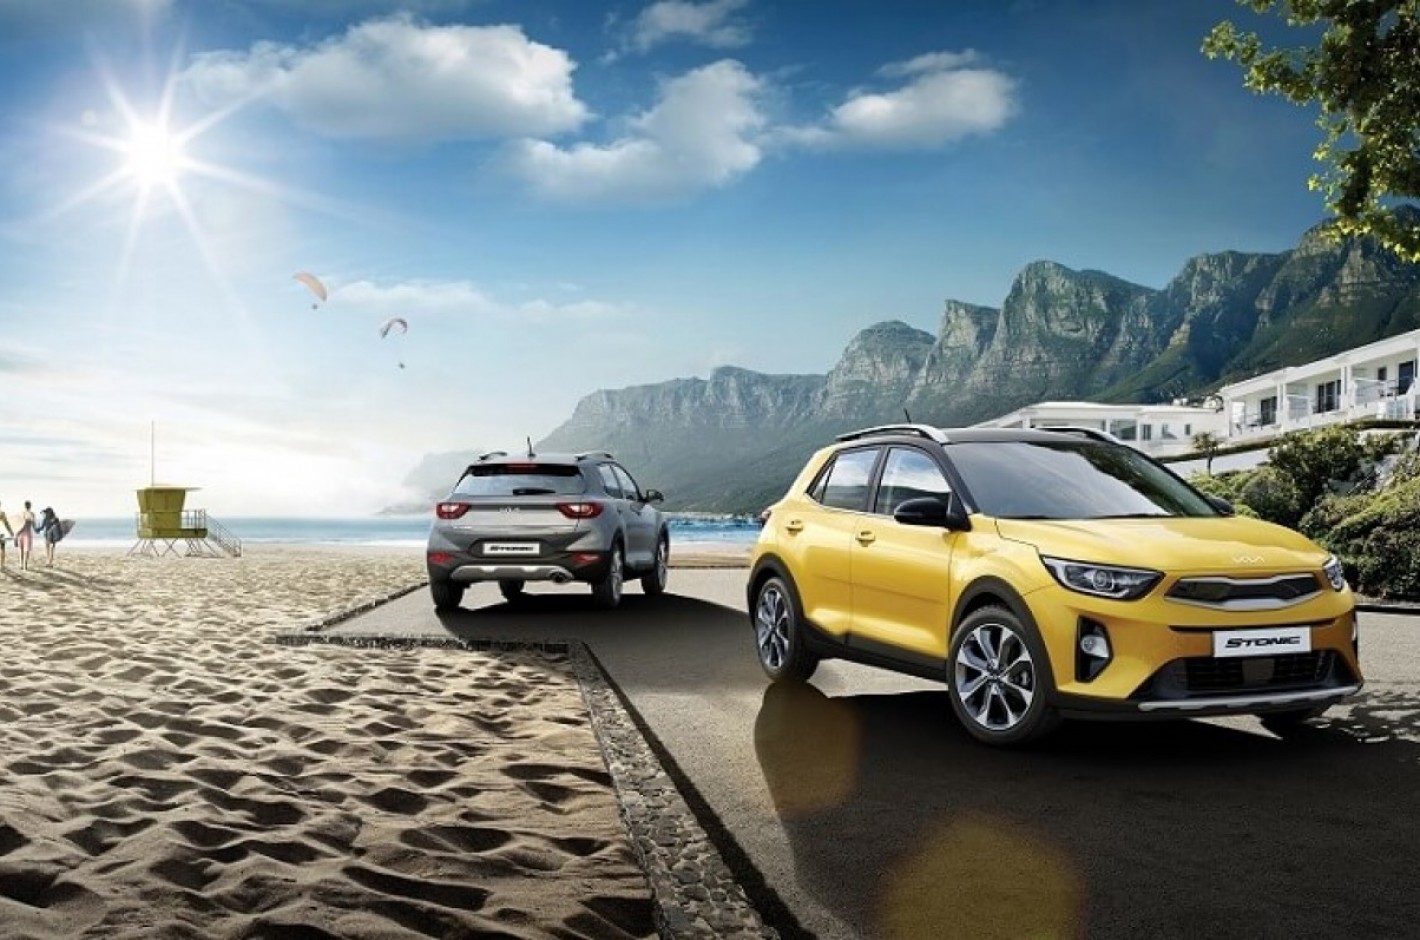 New Zealand April 2021: Kia Stonic surges to #3 in market up 23.7% on two  years ago – Best Selling Cars Blog